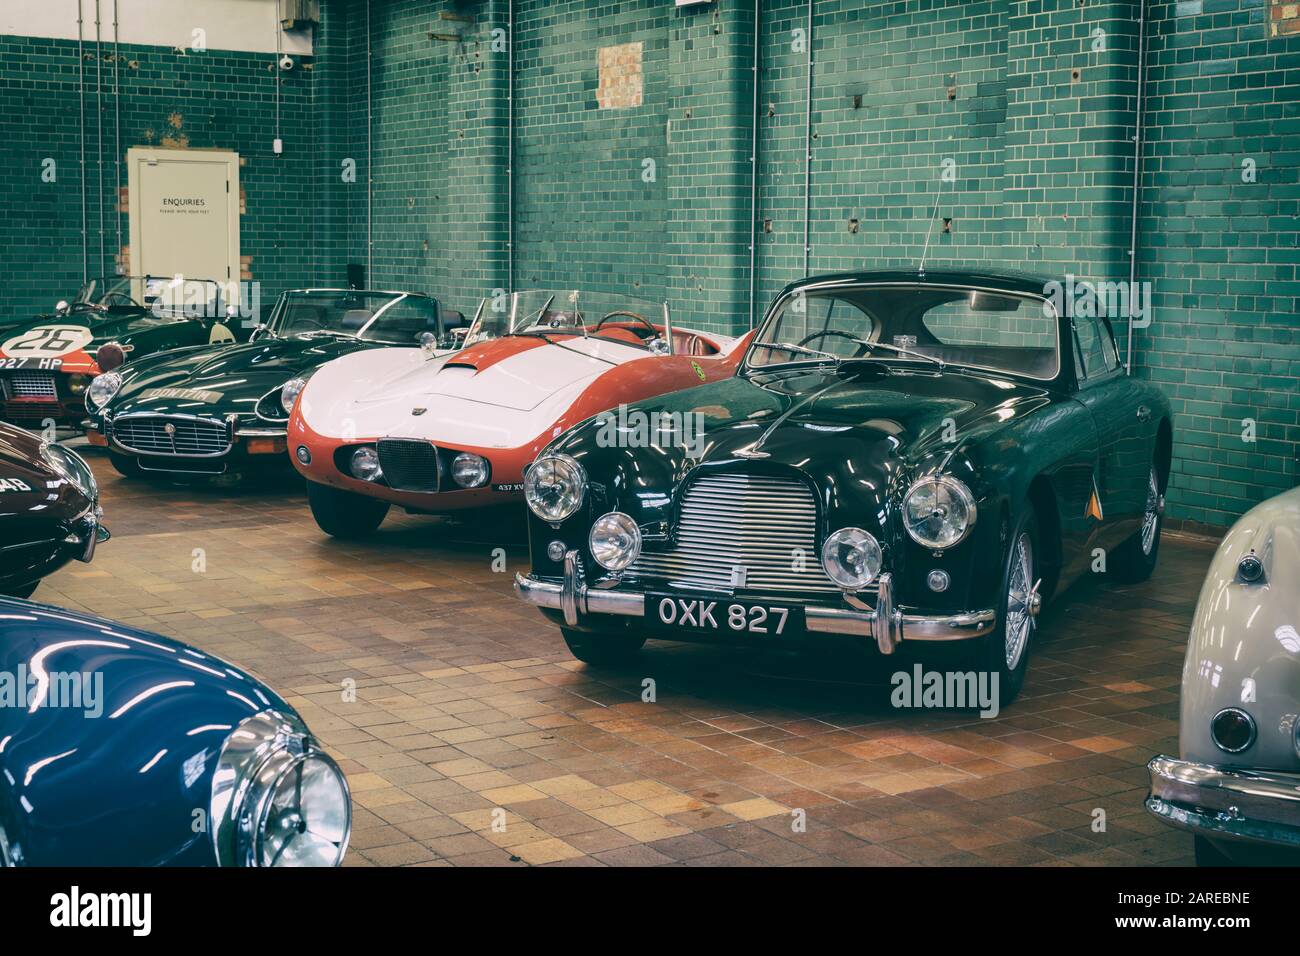 Classic cars inside a workshop at Bicester heritage centre sunday scramble event. Bicester, Oxfordshire, England. Vintage filter applied Stock Photo